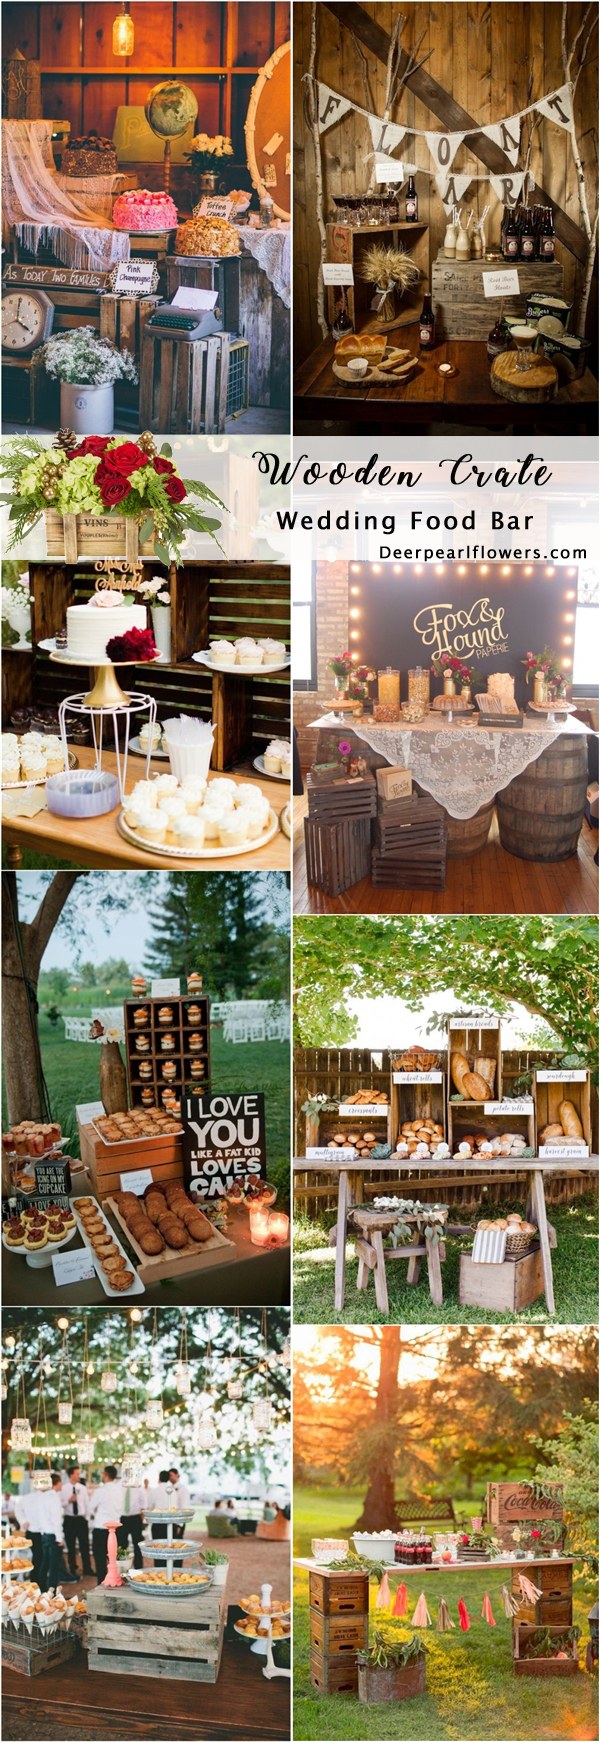 Rustic country wooden crate wedding food bar decor ideas